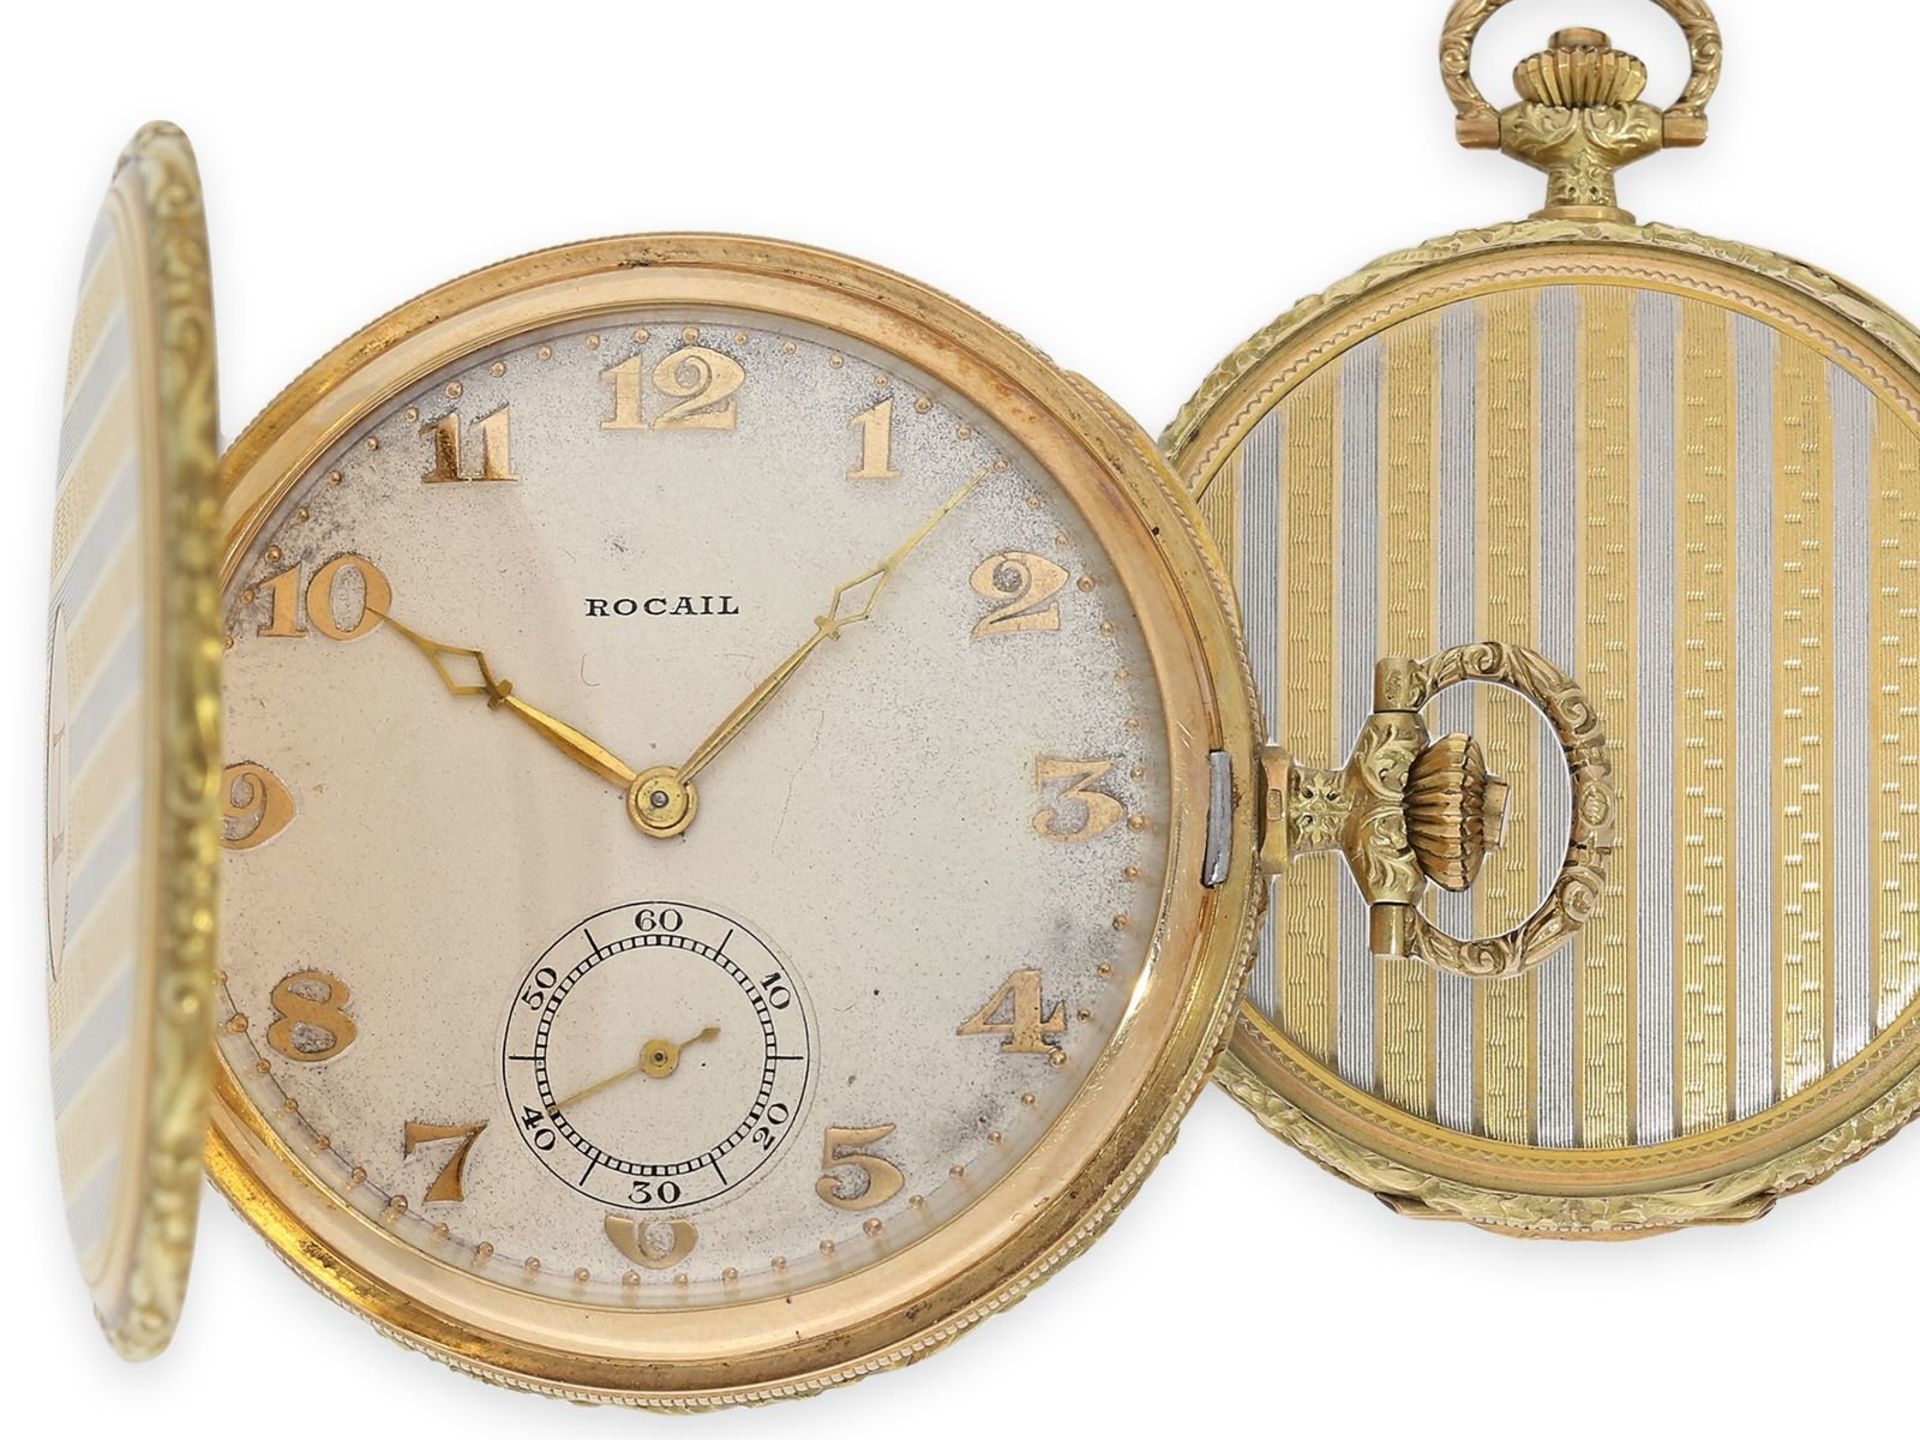 Pocket watch: exquisite, extremely beautiful Art Deco gold hunting case watch with pinstripe